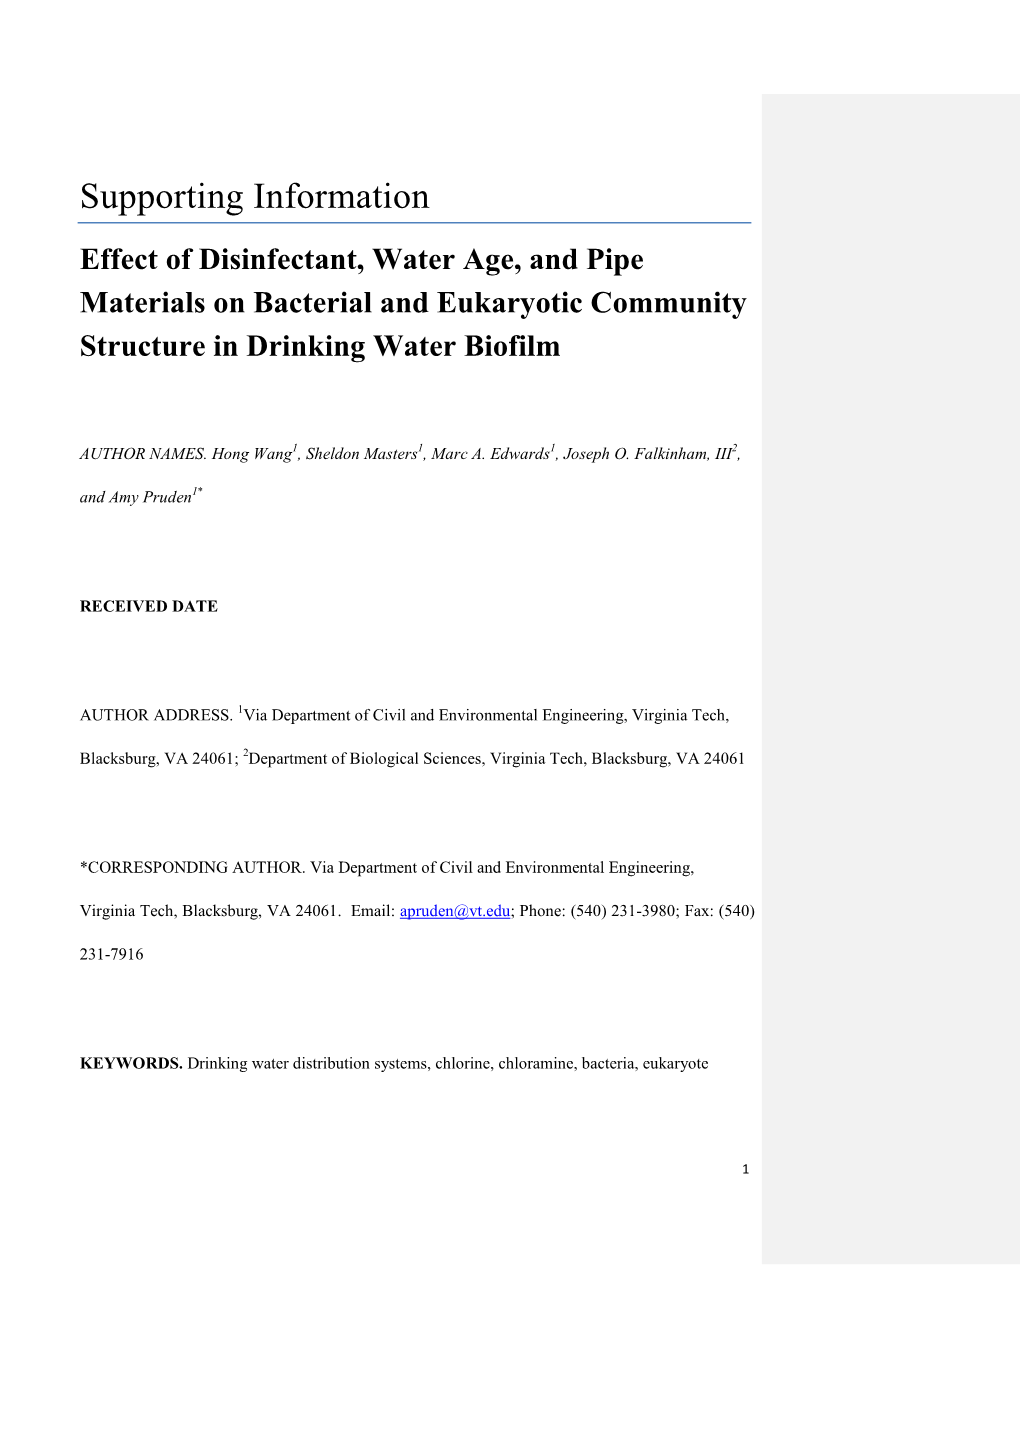 Supporting Information Effect of Disinfectant, Water Age, and Pipe Materials on Bacterial and Eukaryotic Community Structure in Drinking Water Biofilm